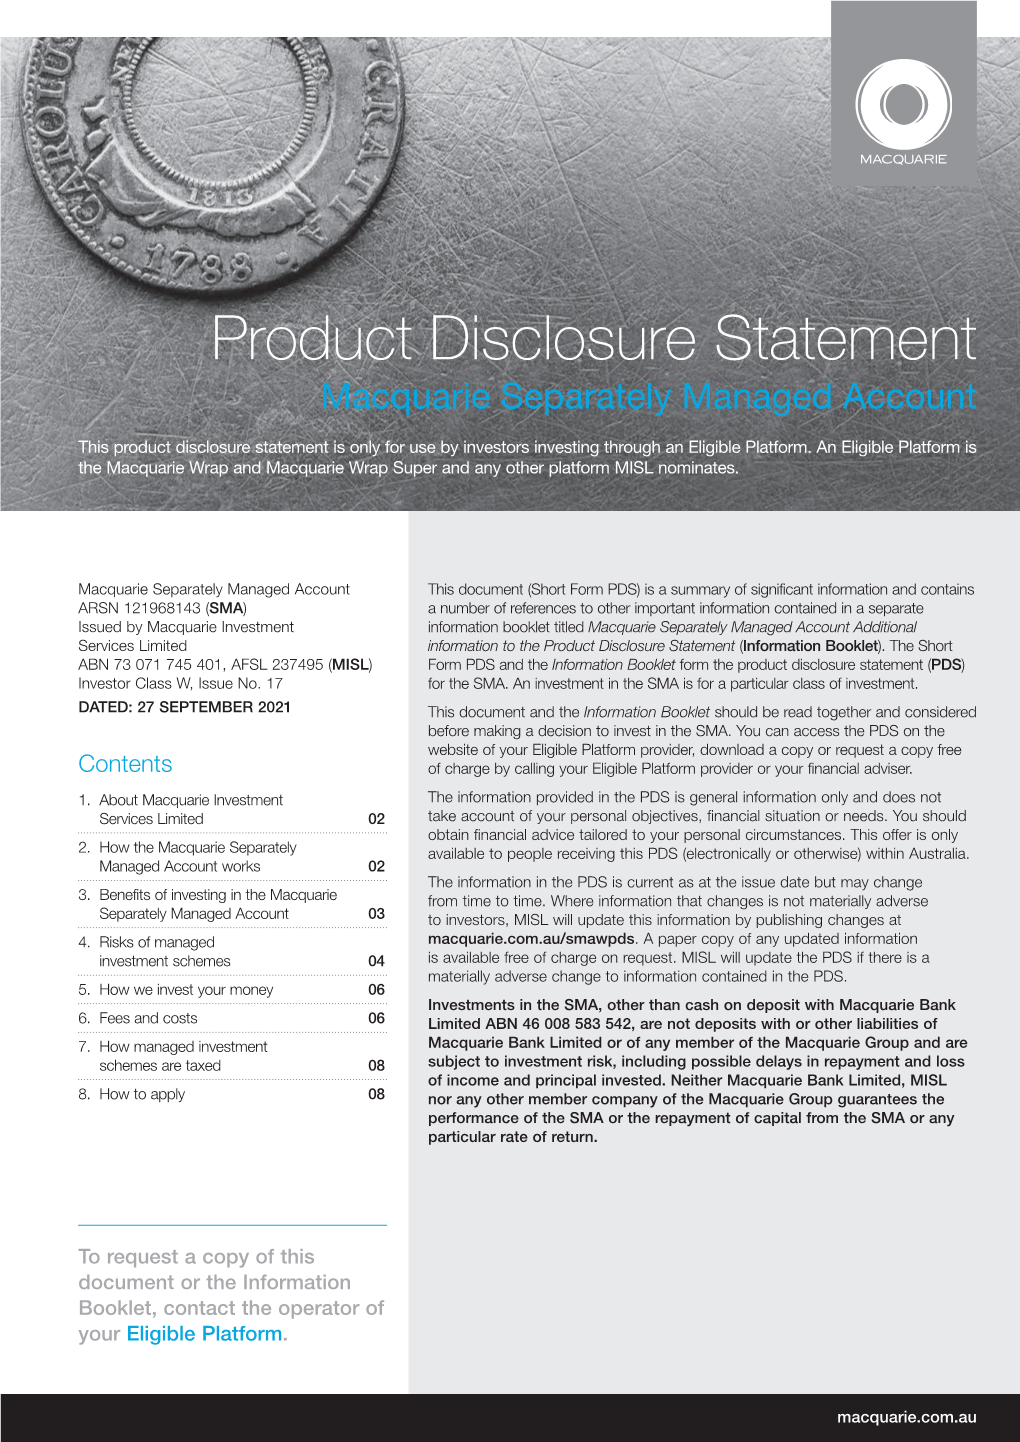 Macquarie Separately Managed Account Product Disclosure Statement As Amended from Time to Time (Short Form PDS)